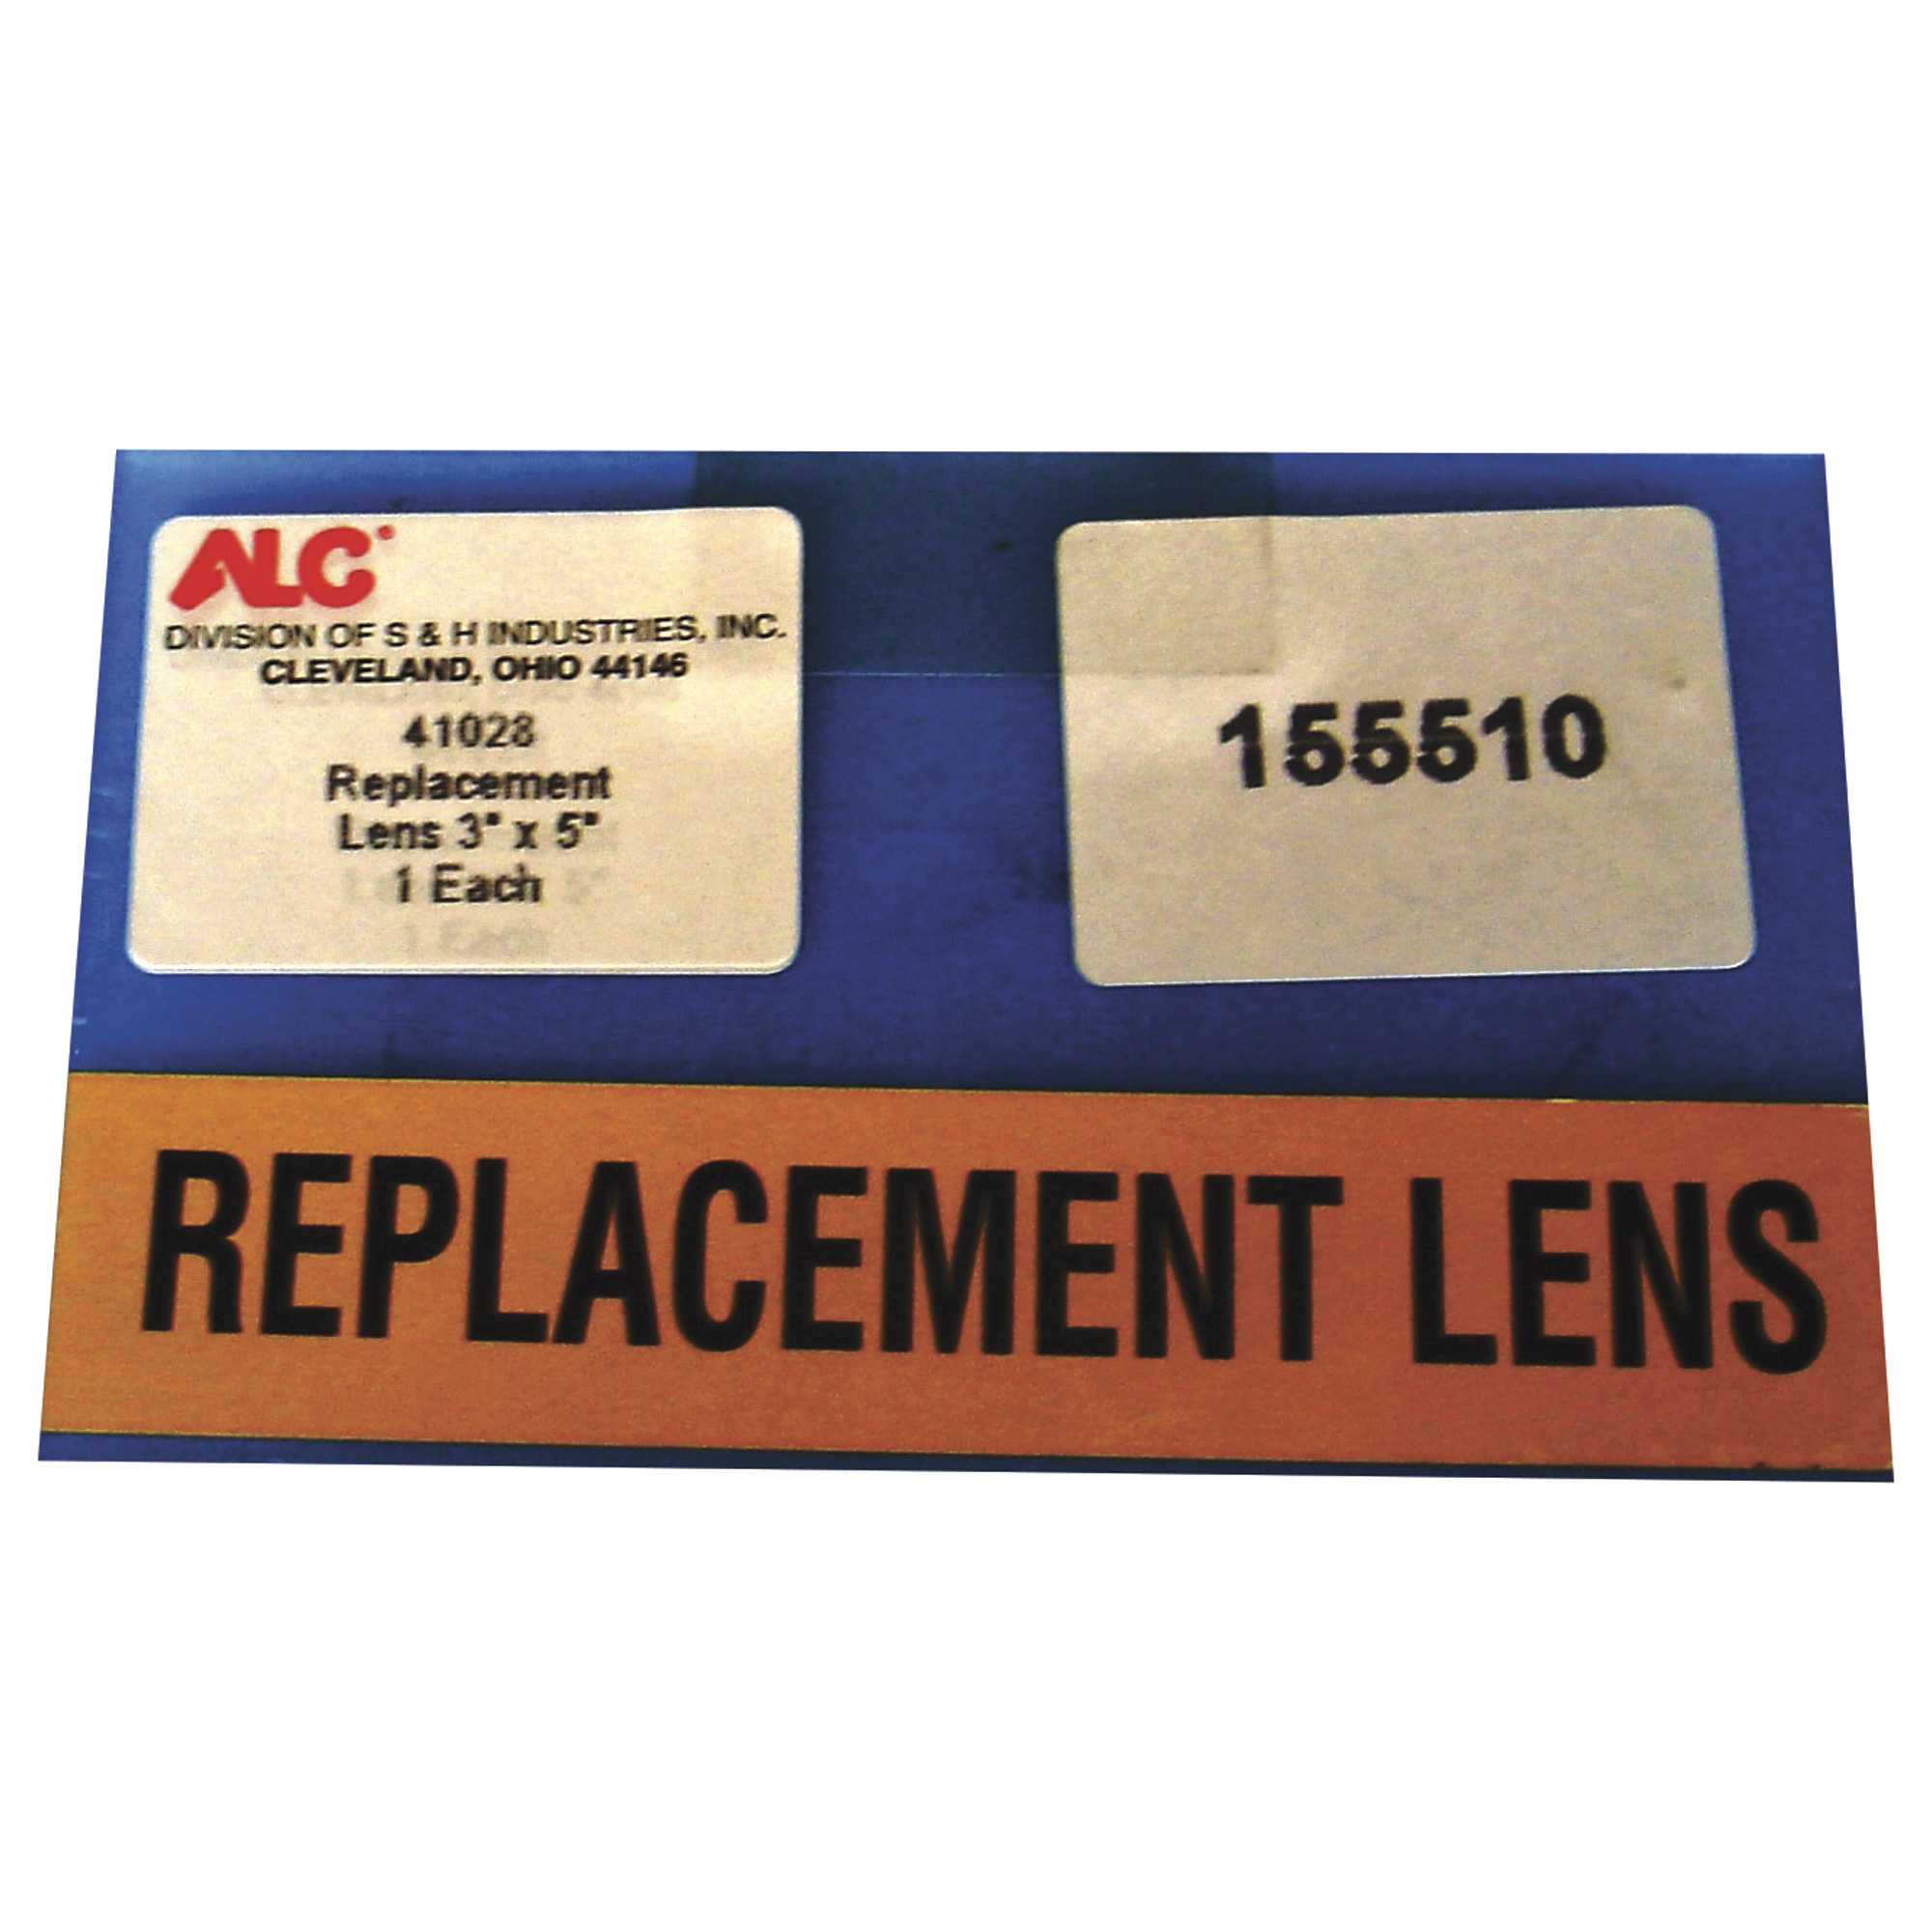 ALC Replacement Lens for Abrasive Blasting Hood â 3Inch x 5Inch, Model 41028